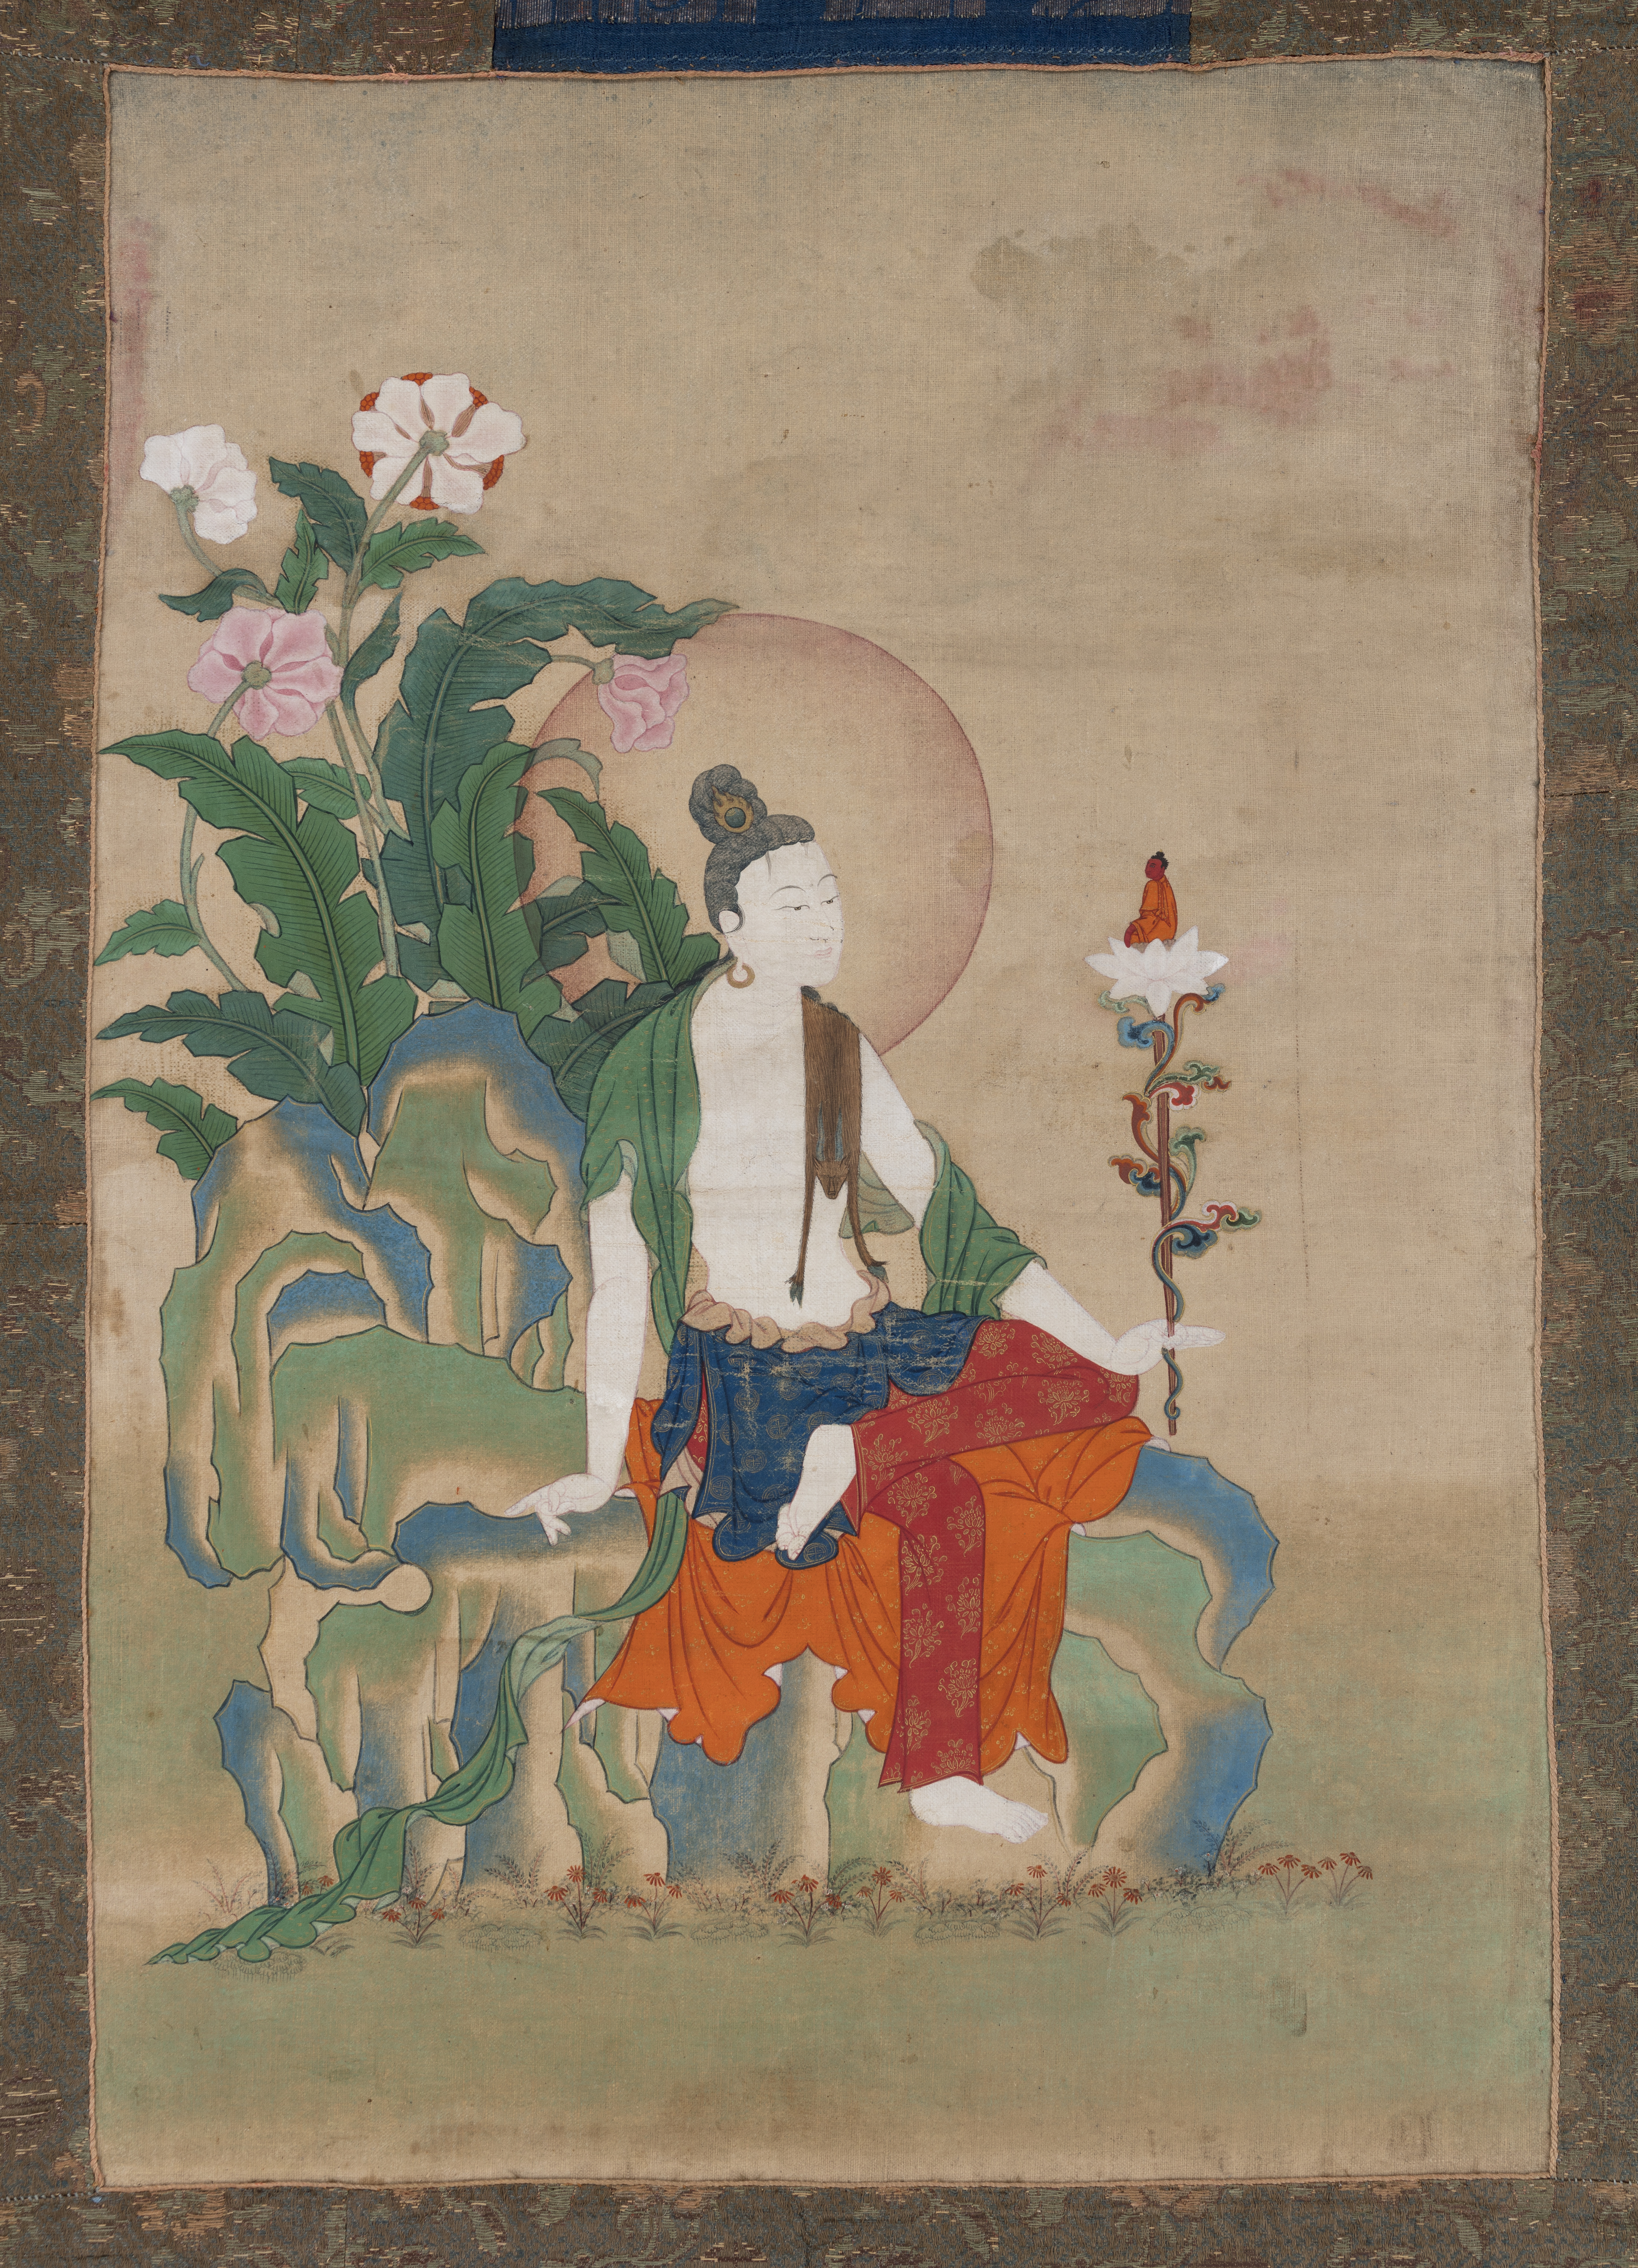 Bodhisattva dressed in sumptuous dhoti holds blossom in right hand while seated on rocky outcropping